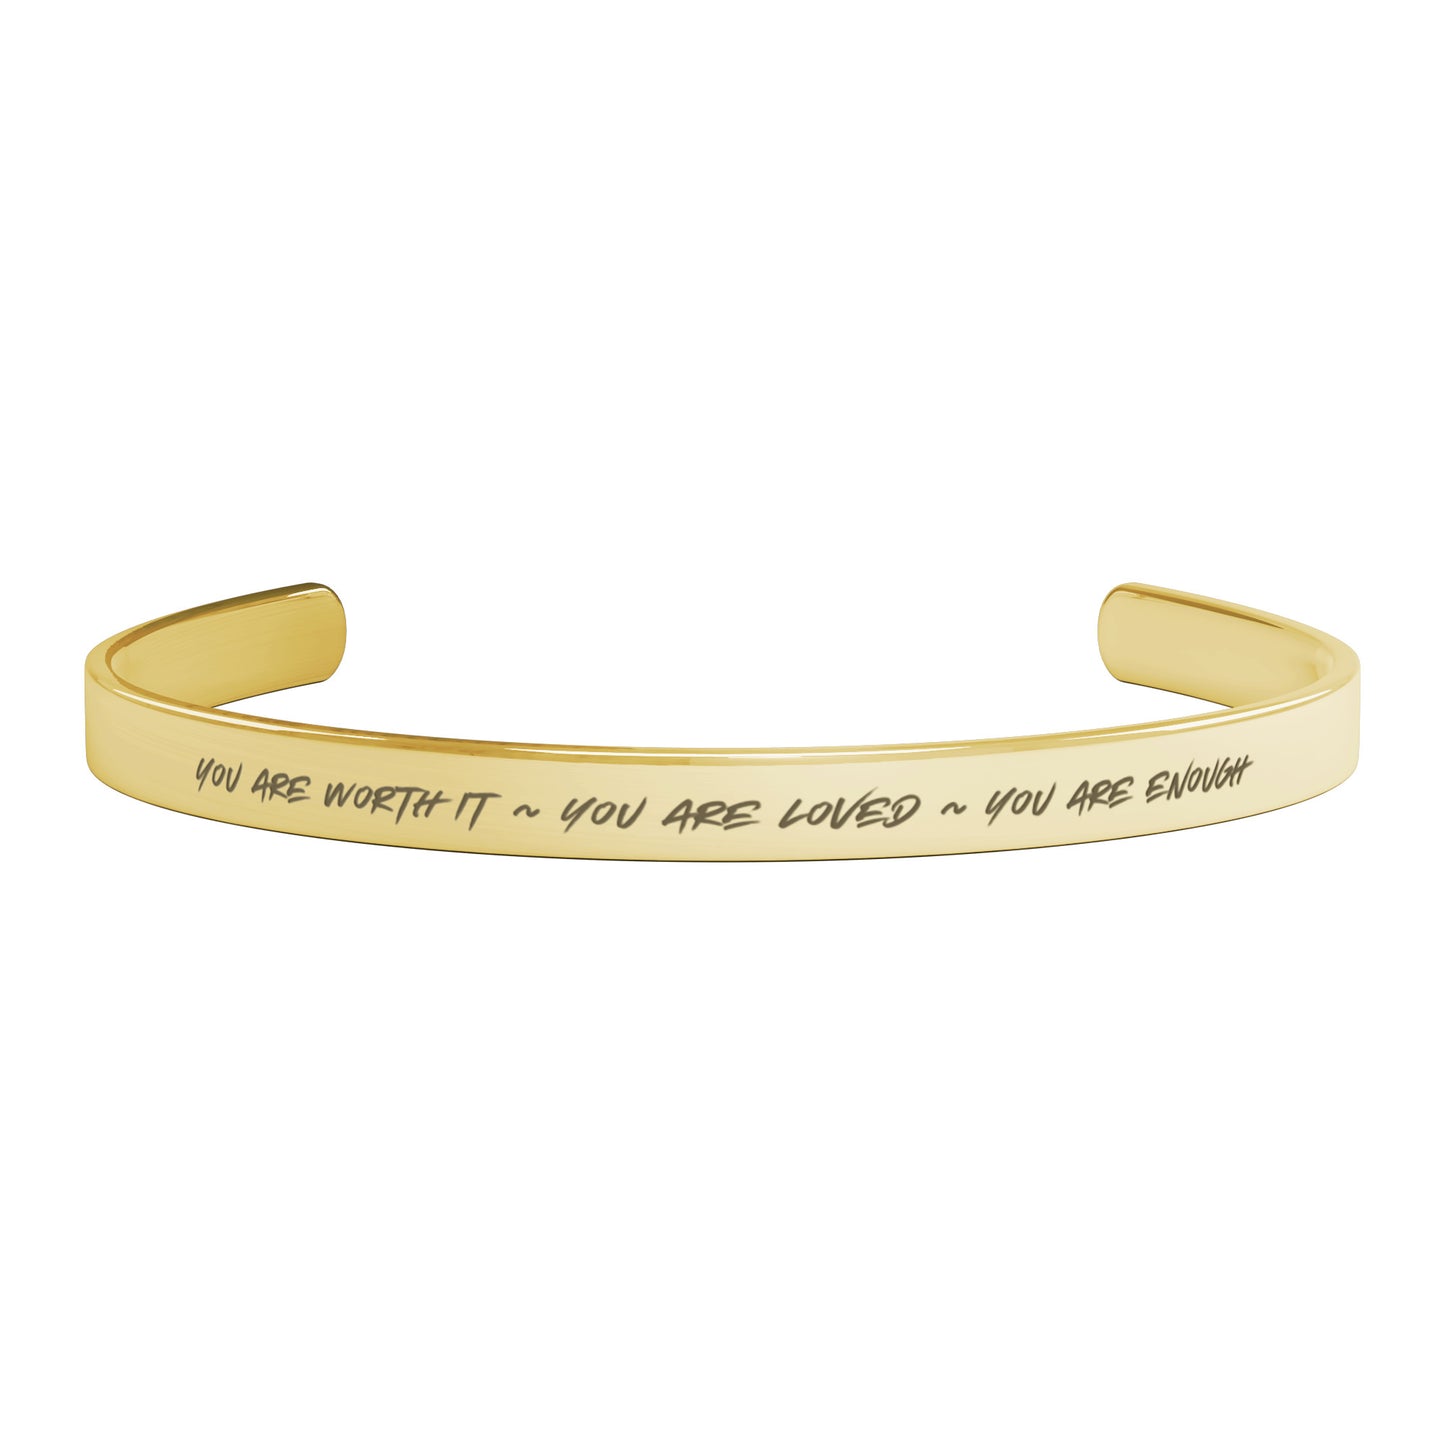 You are Worth it ~ You are Loved ~ You are Enough Bracelet